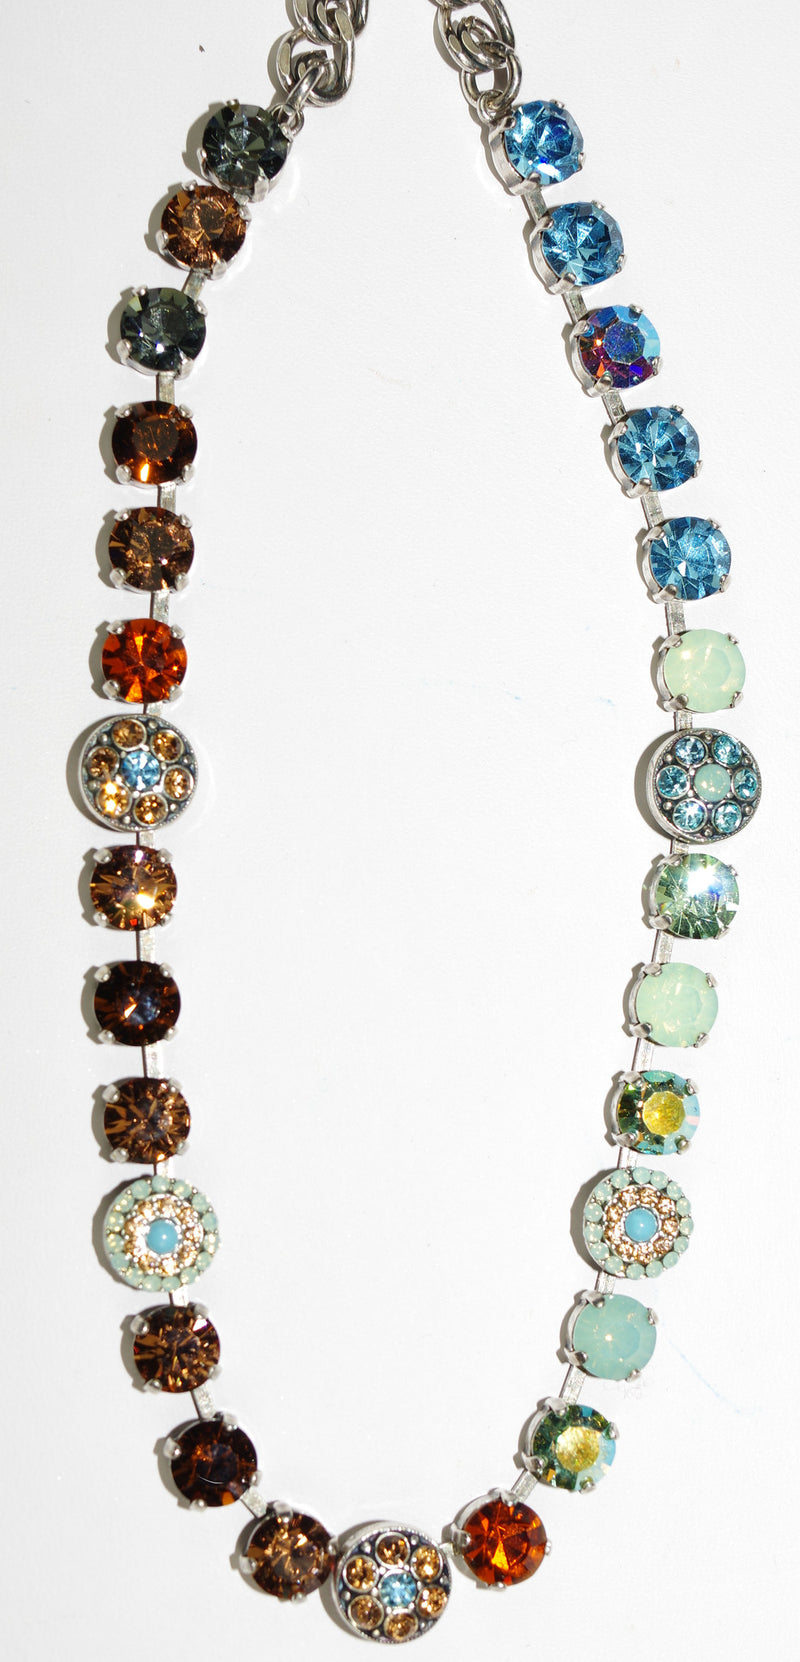 MARIANA NECKLACE FORGET ME NOT: blue, amber, pacific opal stones in silver setting, 18" adjustable chain